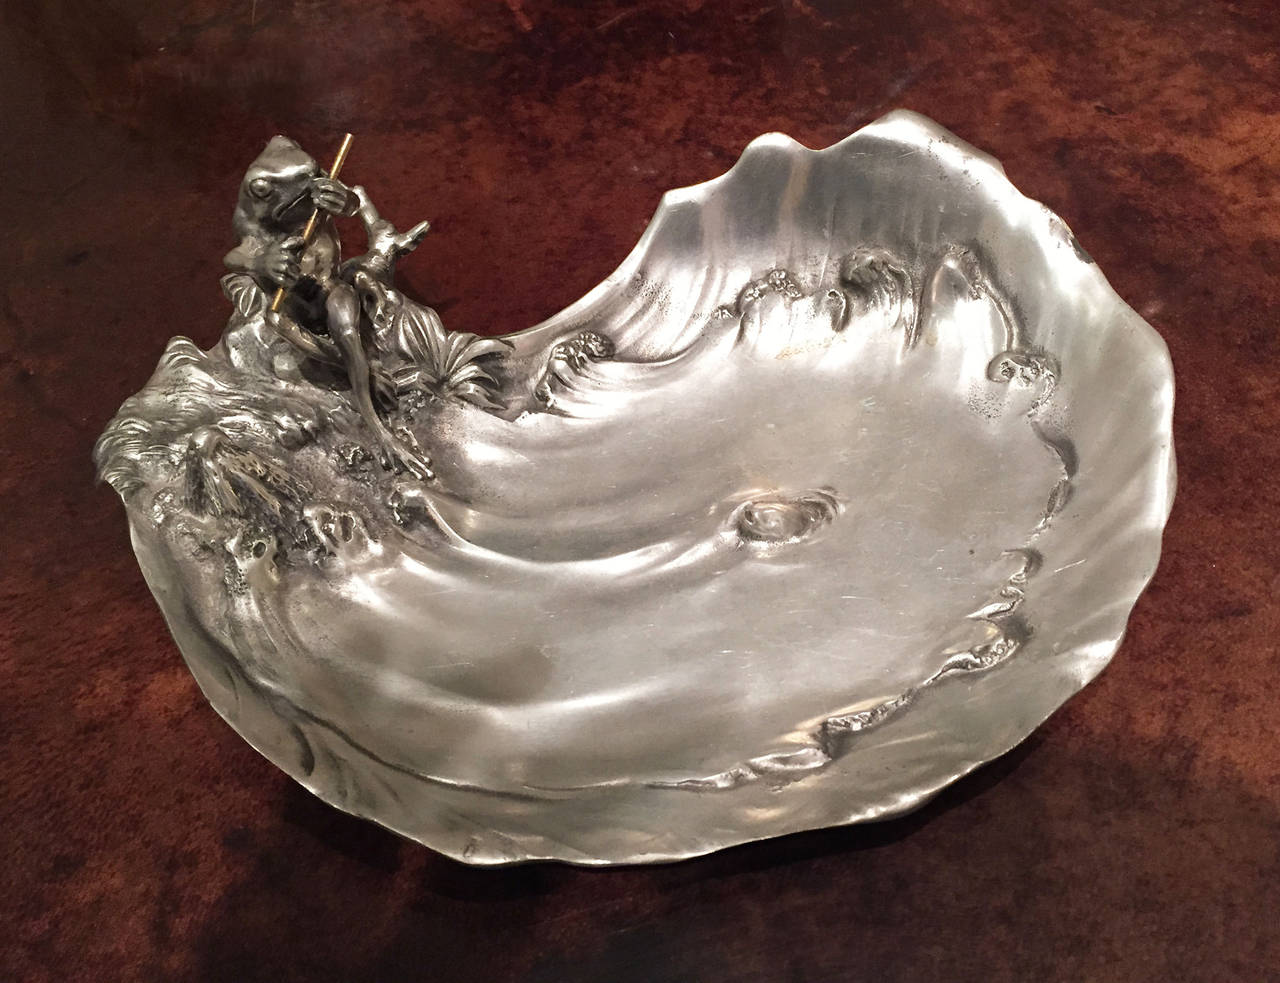 Italian Art Nouveau Pewter Dish by Achille Gamba For Sale at 1stdibs